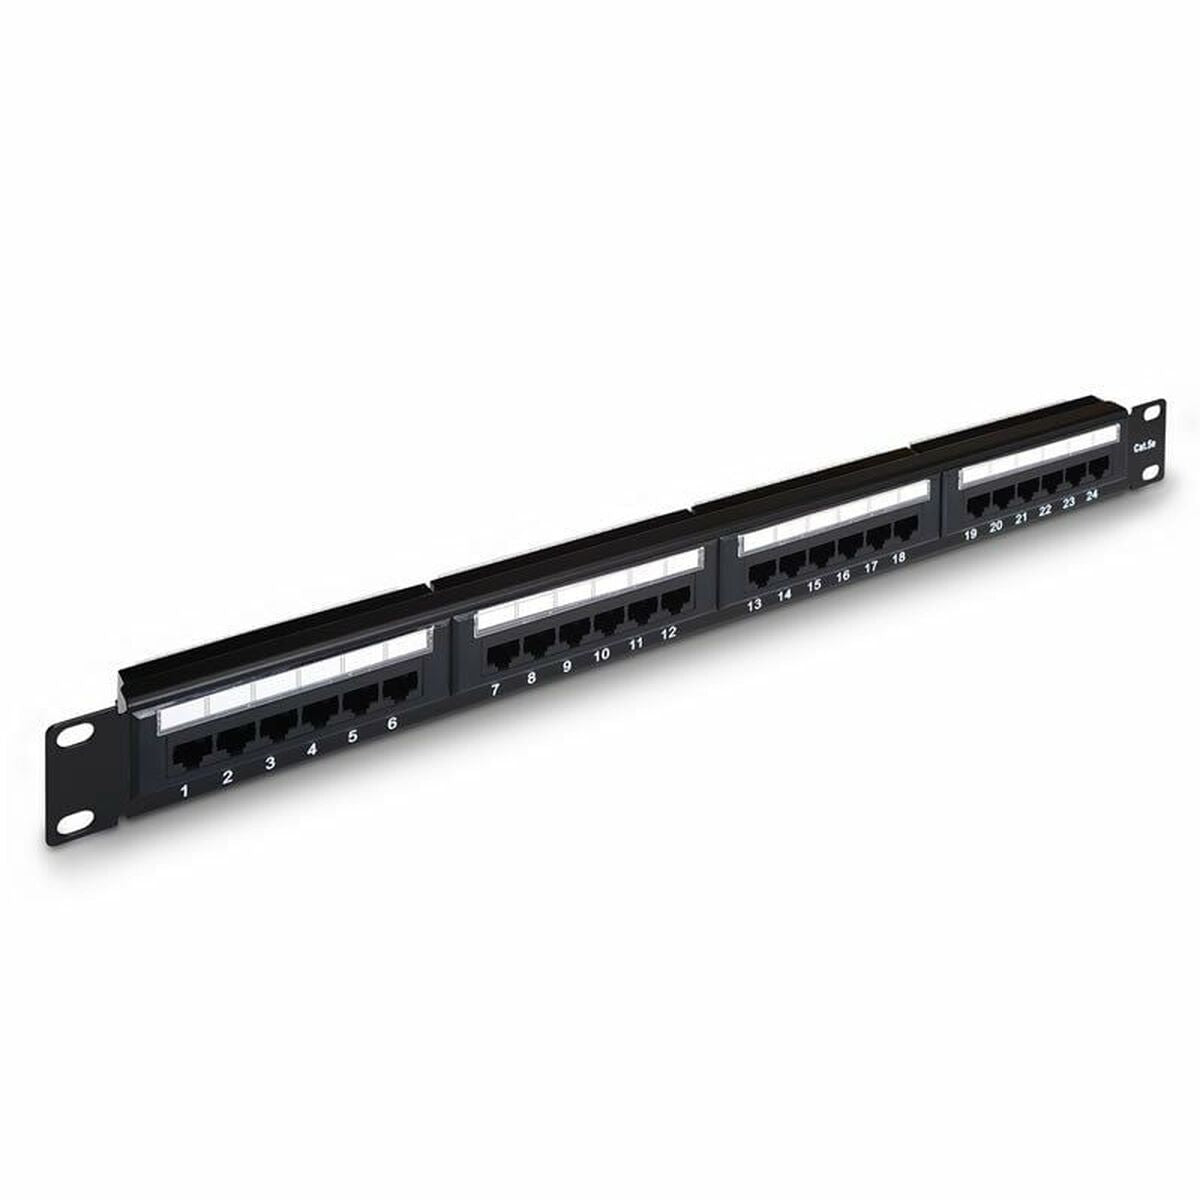 24-port UTP Category 5e Patch Panel Aisens A141-0307, Aisens, Computing, Accessories, 24-port-utp-category-5e-patch-panel-aisens-a141-0307, Brand_Aisens, category-reference-2609, category-reference-2803, category-reference-2828, category-reference-t-19685, category-reference-t-19908, category-reference-t-21349, Condition_NEW, furniture, networks/wiring, organisation, Price_20 - 50, Teleworking, RiotNook